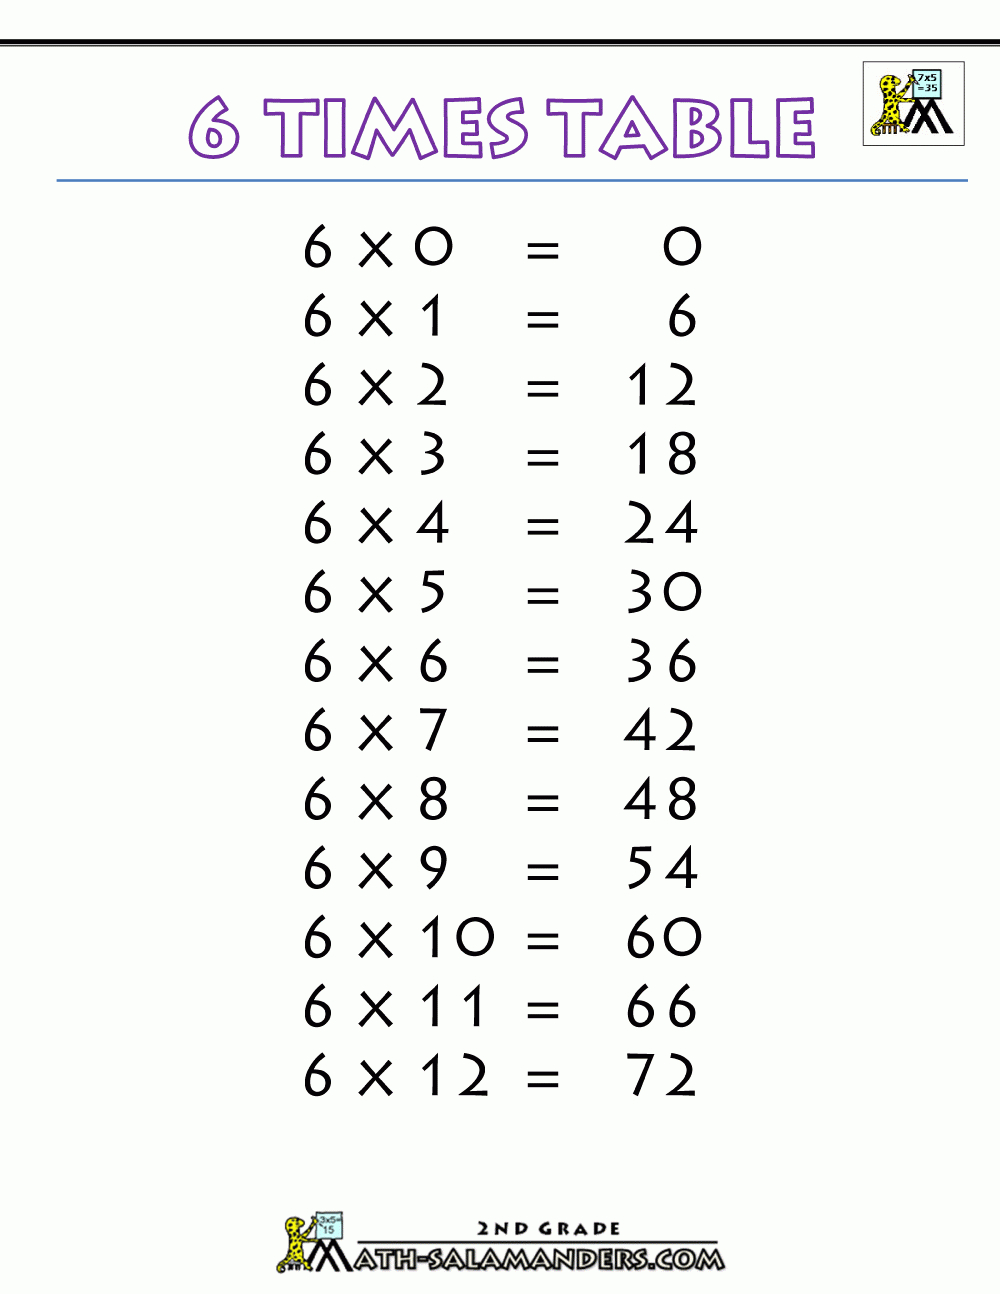 6 Times Table with Printable Multiplication Worksheets 6 Times Tables